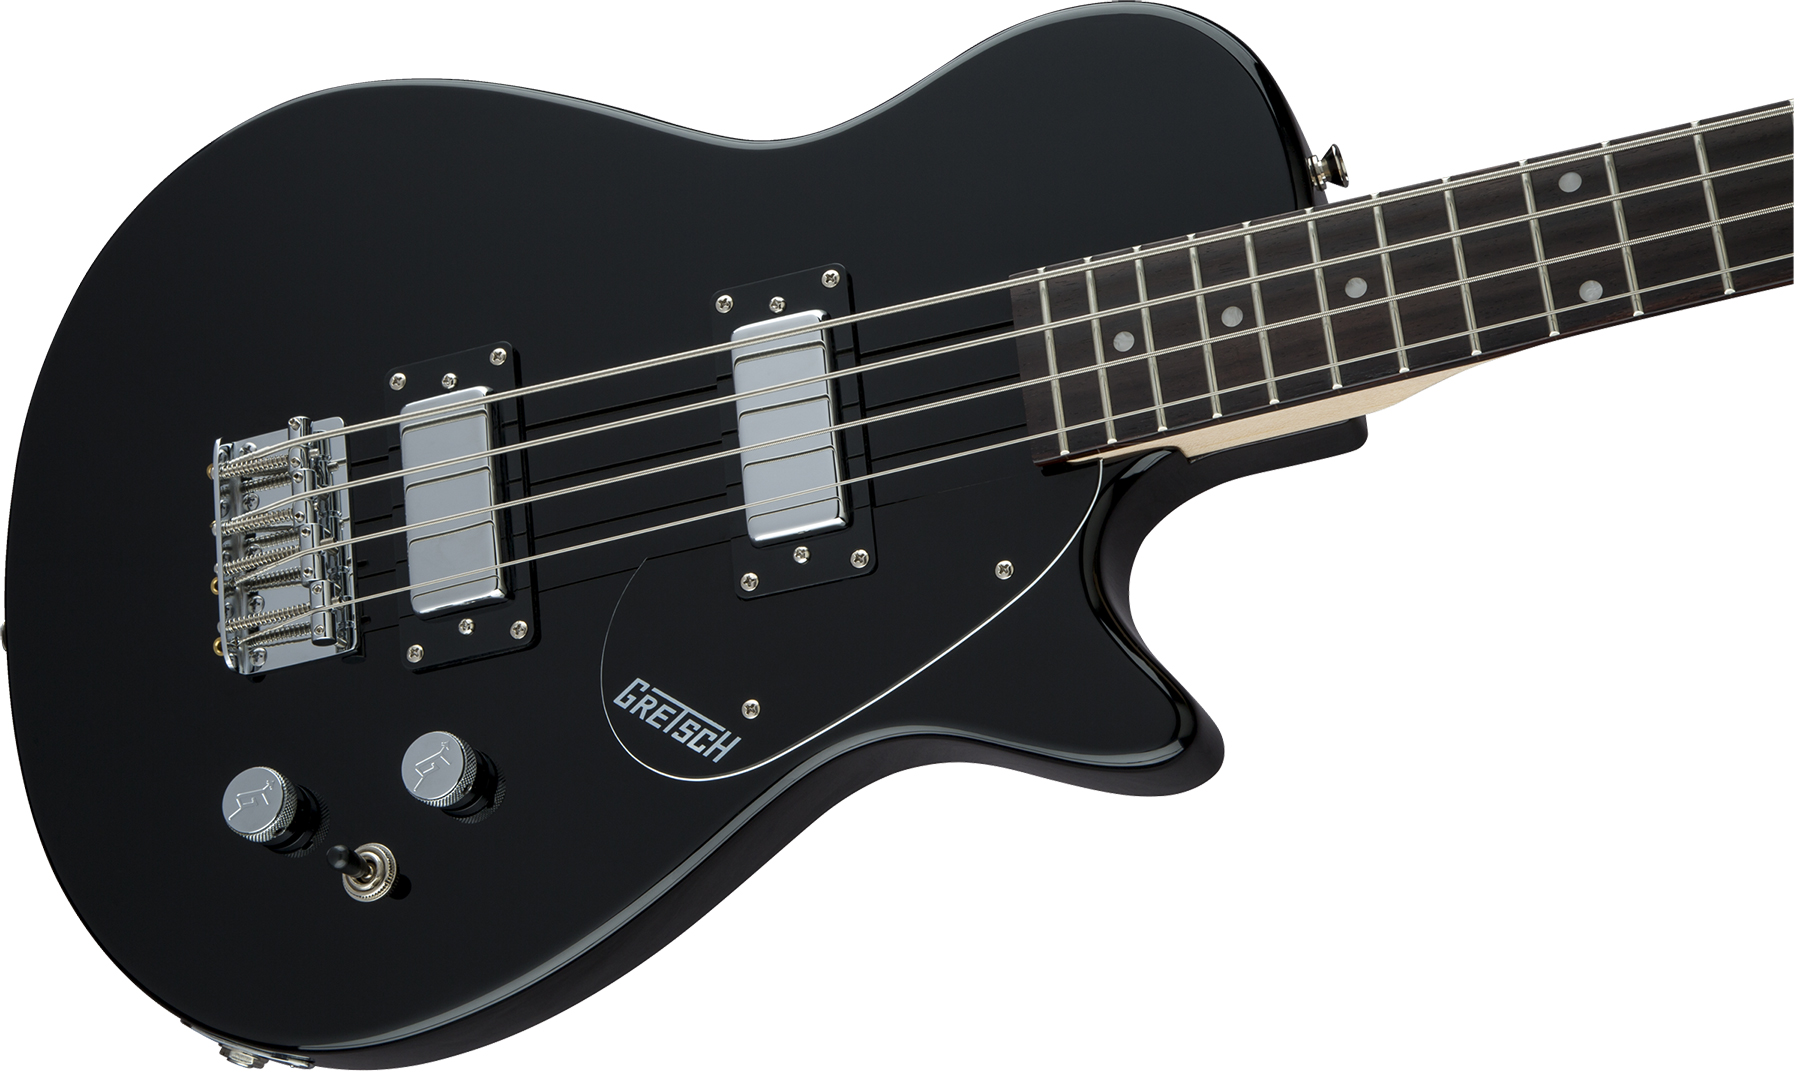 Gretsch G2220 Electromatic Junior Jet Bass Ii Short-scale 2019 Hh Wal - Black - Basse Électrique Solid Body - Variation 2